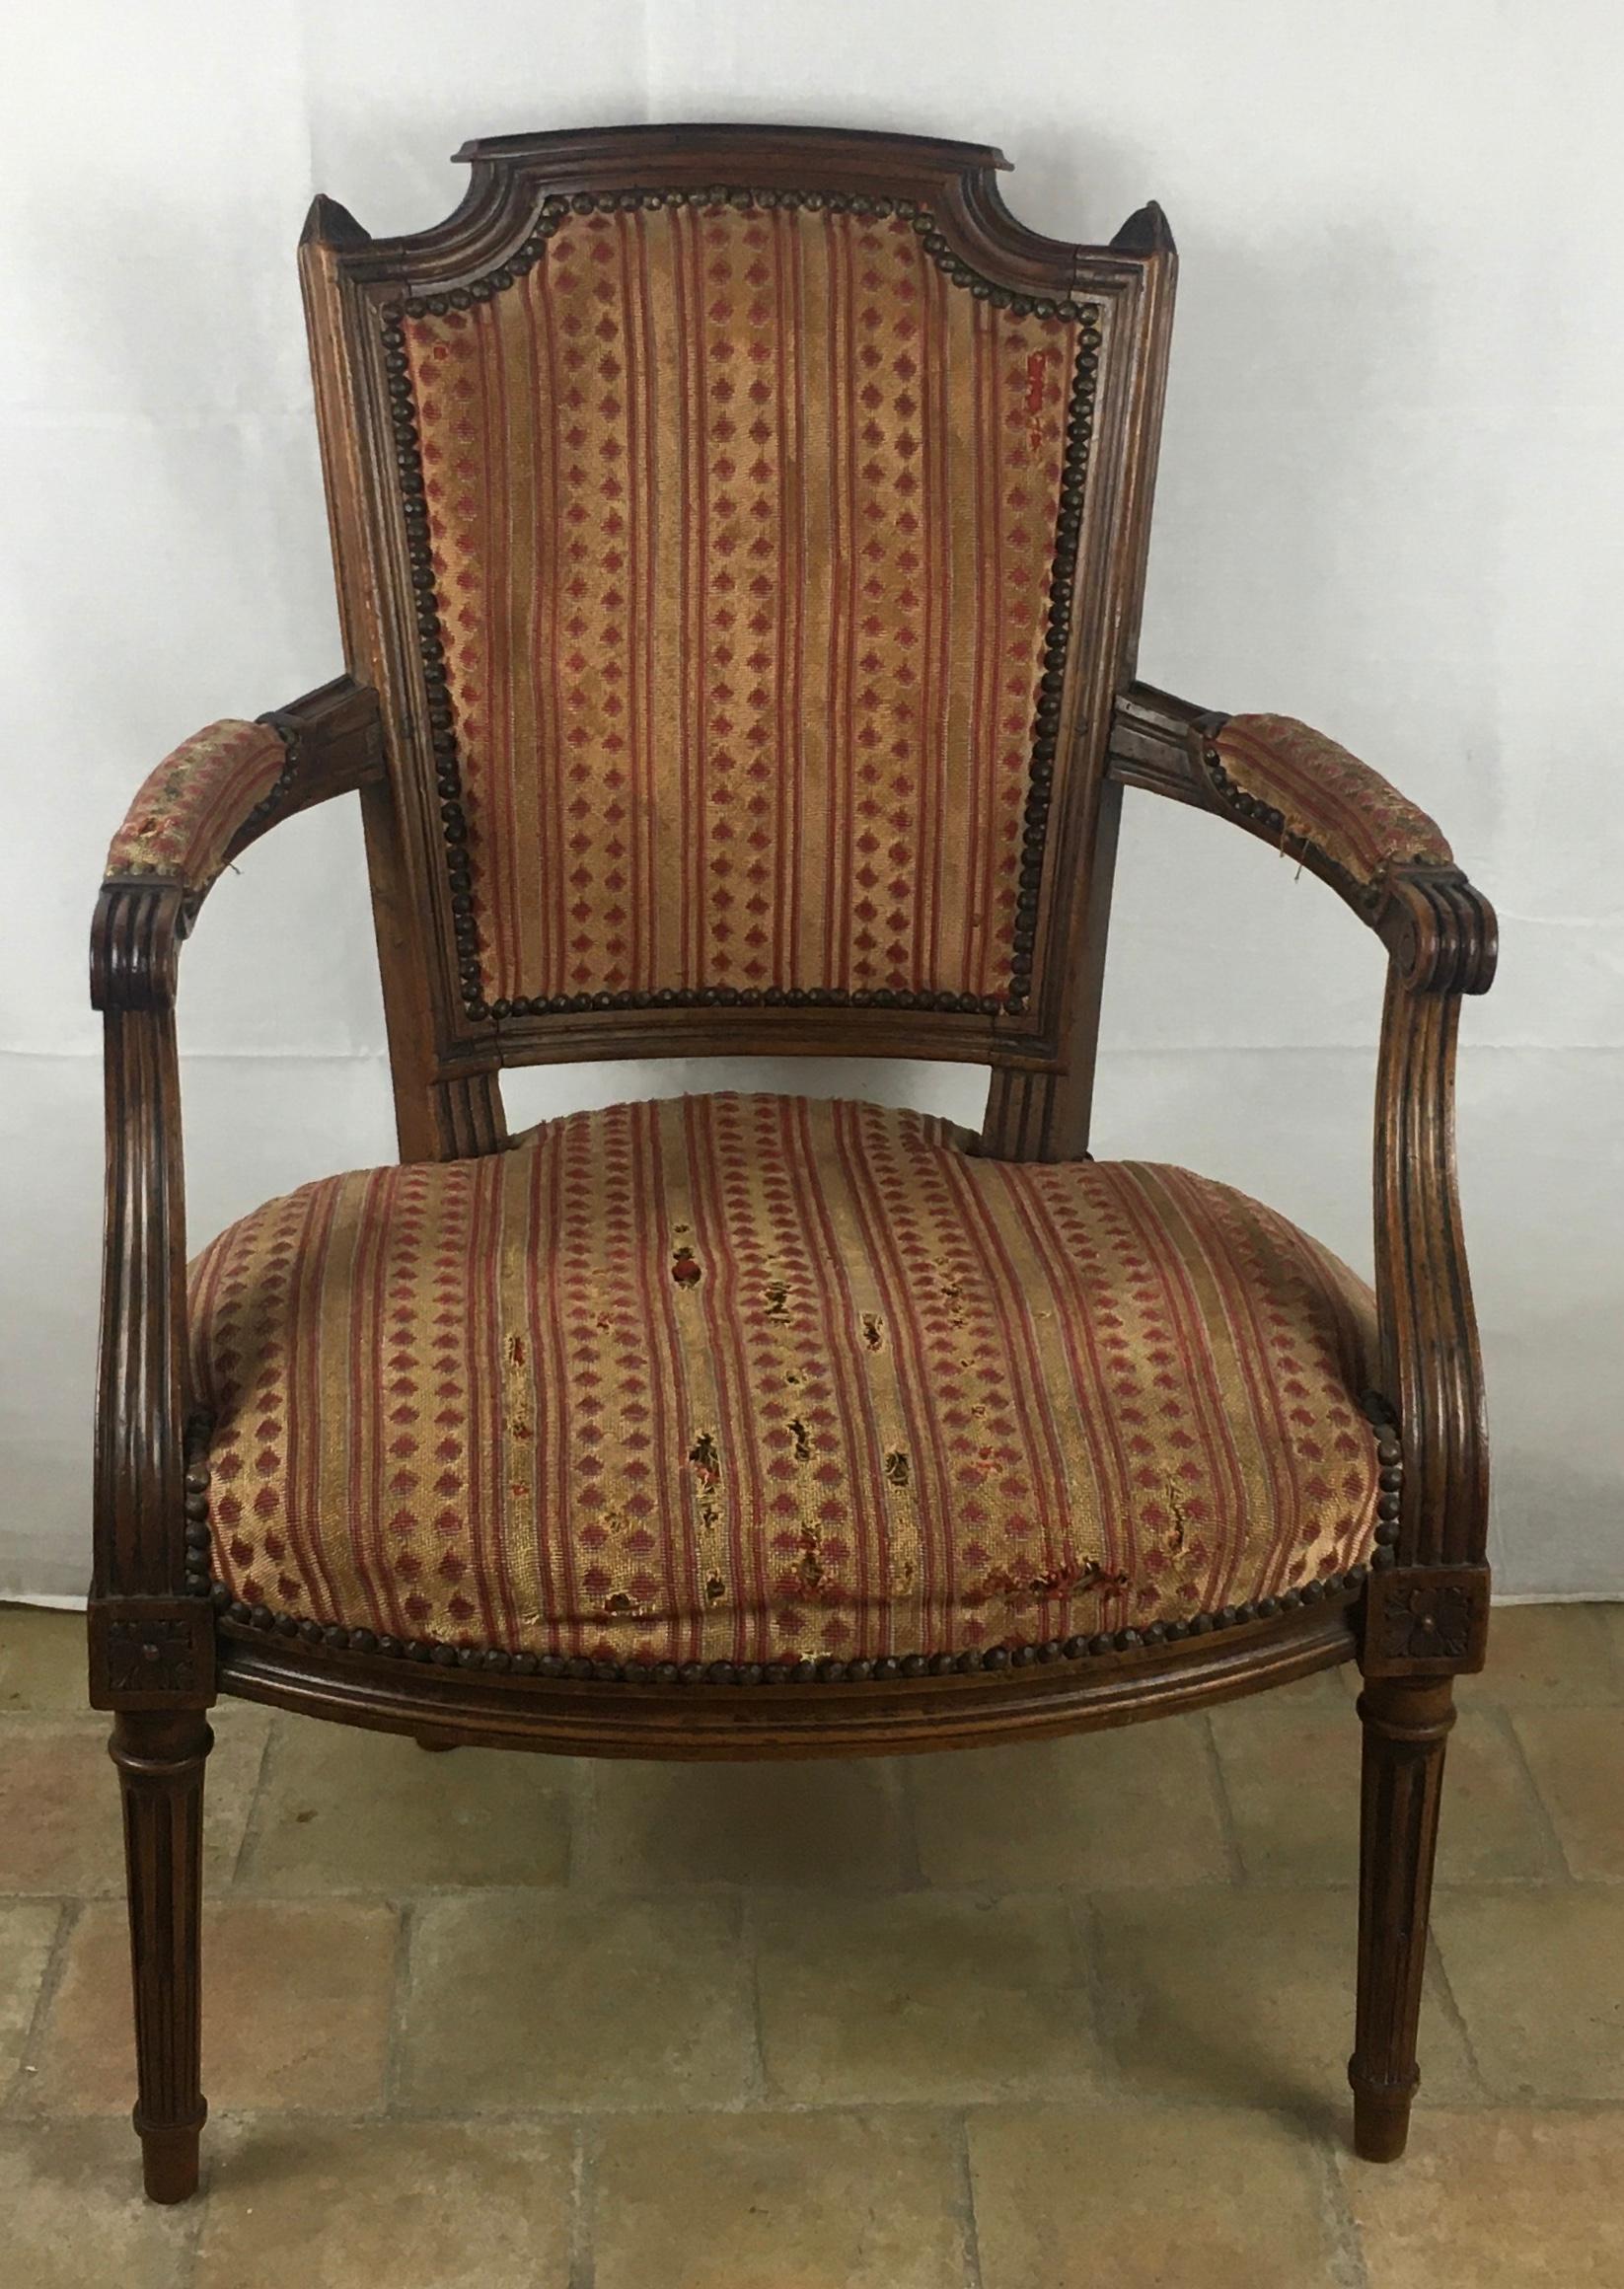 Important pair of 18th century Louis XVI armchairs stamped Menuisier du Roy (Ebeniste of the King).

Very generous proportions, these beautiful armchairs are constructed with strong beechwood and are sturdy enough to be used daily. These stylish